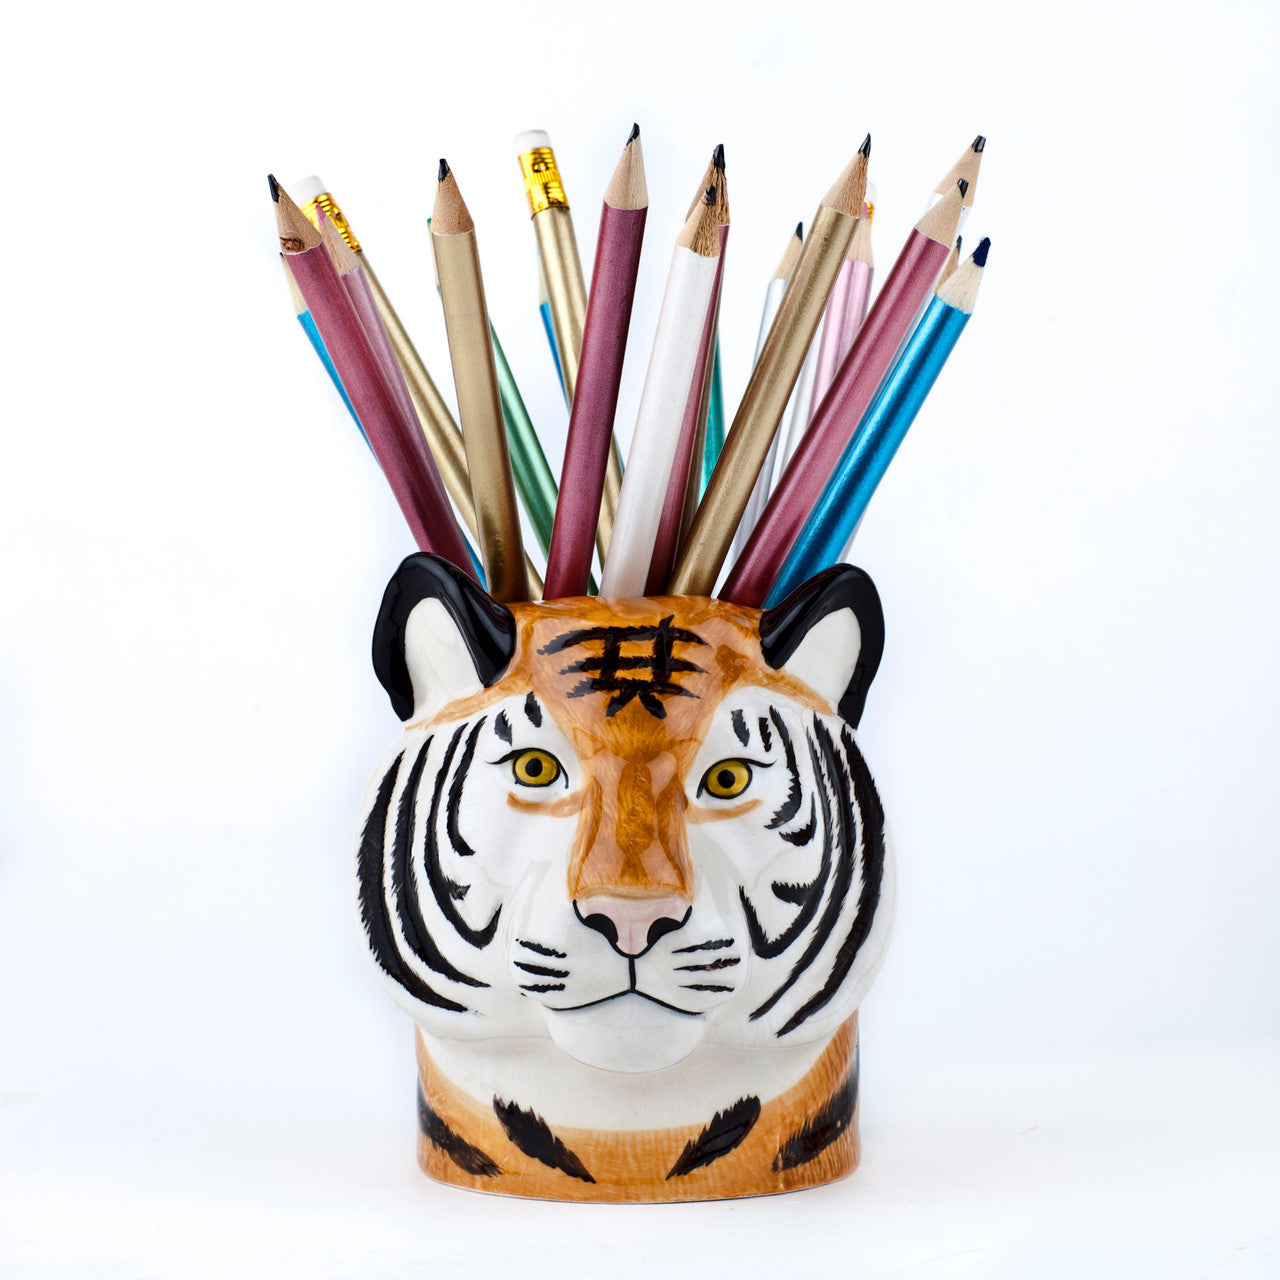 A quirky Tiger Ceramic pencil holder filled with a vibrant set of colored pencils designed by British brand, Quail.